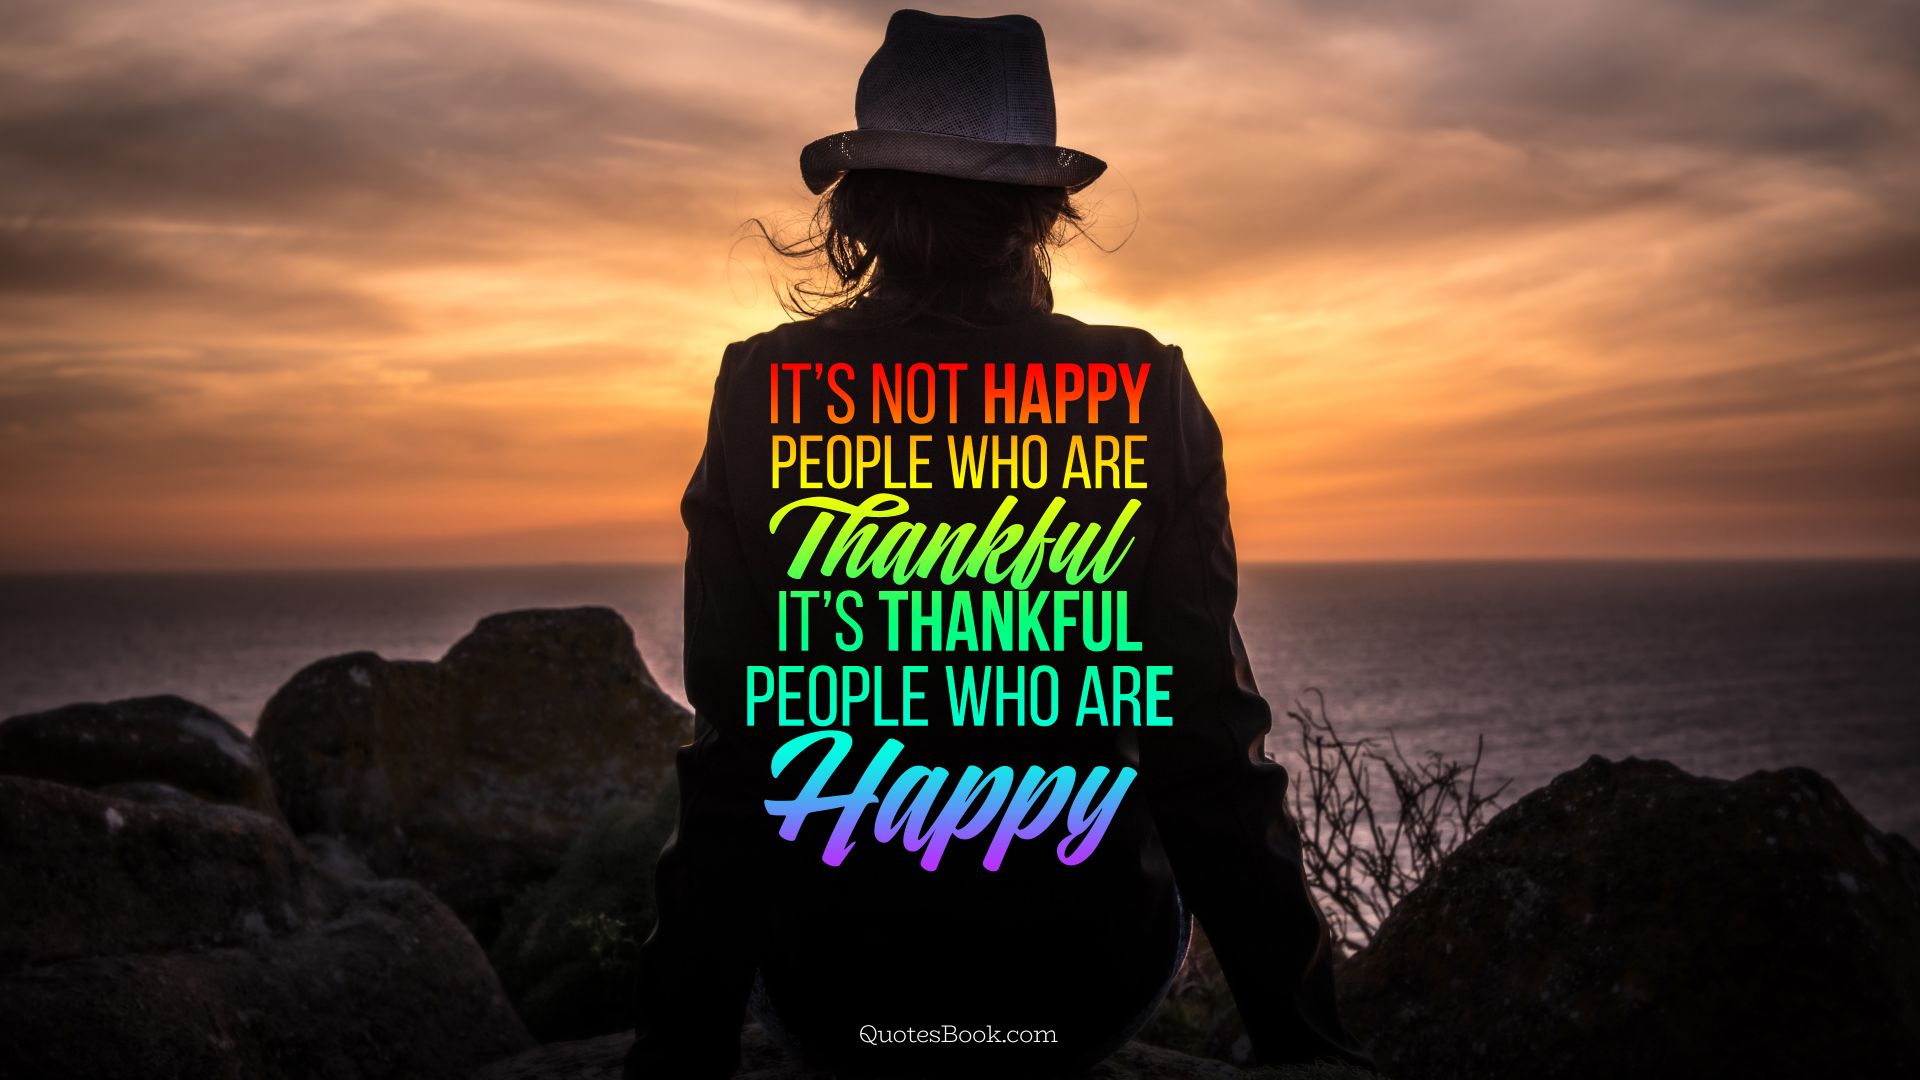 It’s not happy people who are thankful it’s thankful people who are happy